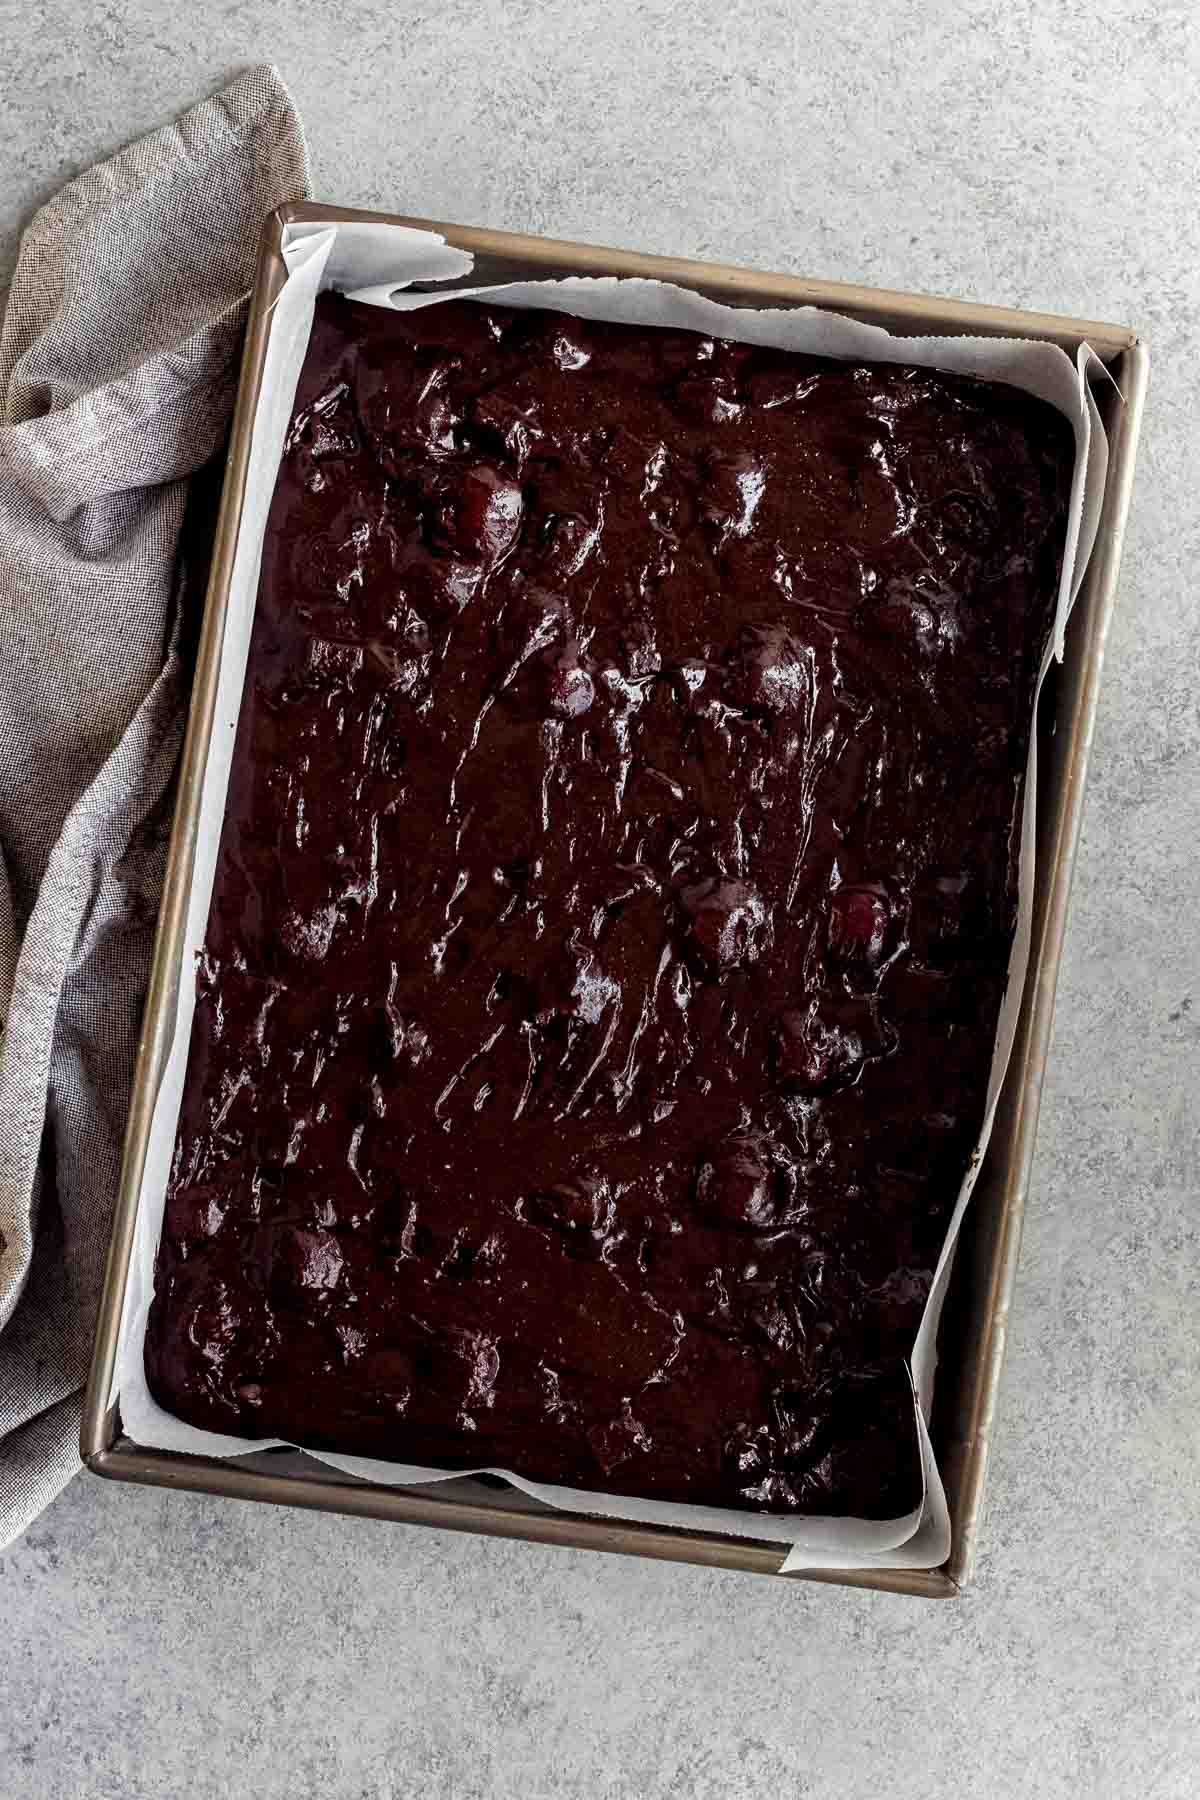 Black Forest Brownie batter in 9x13 baking dish